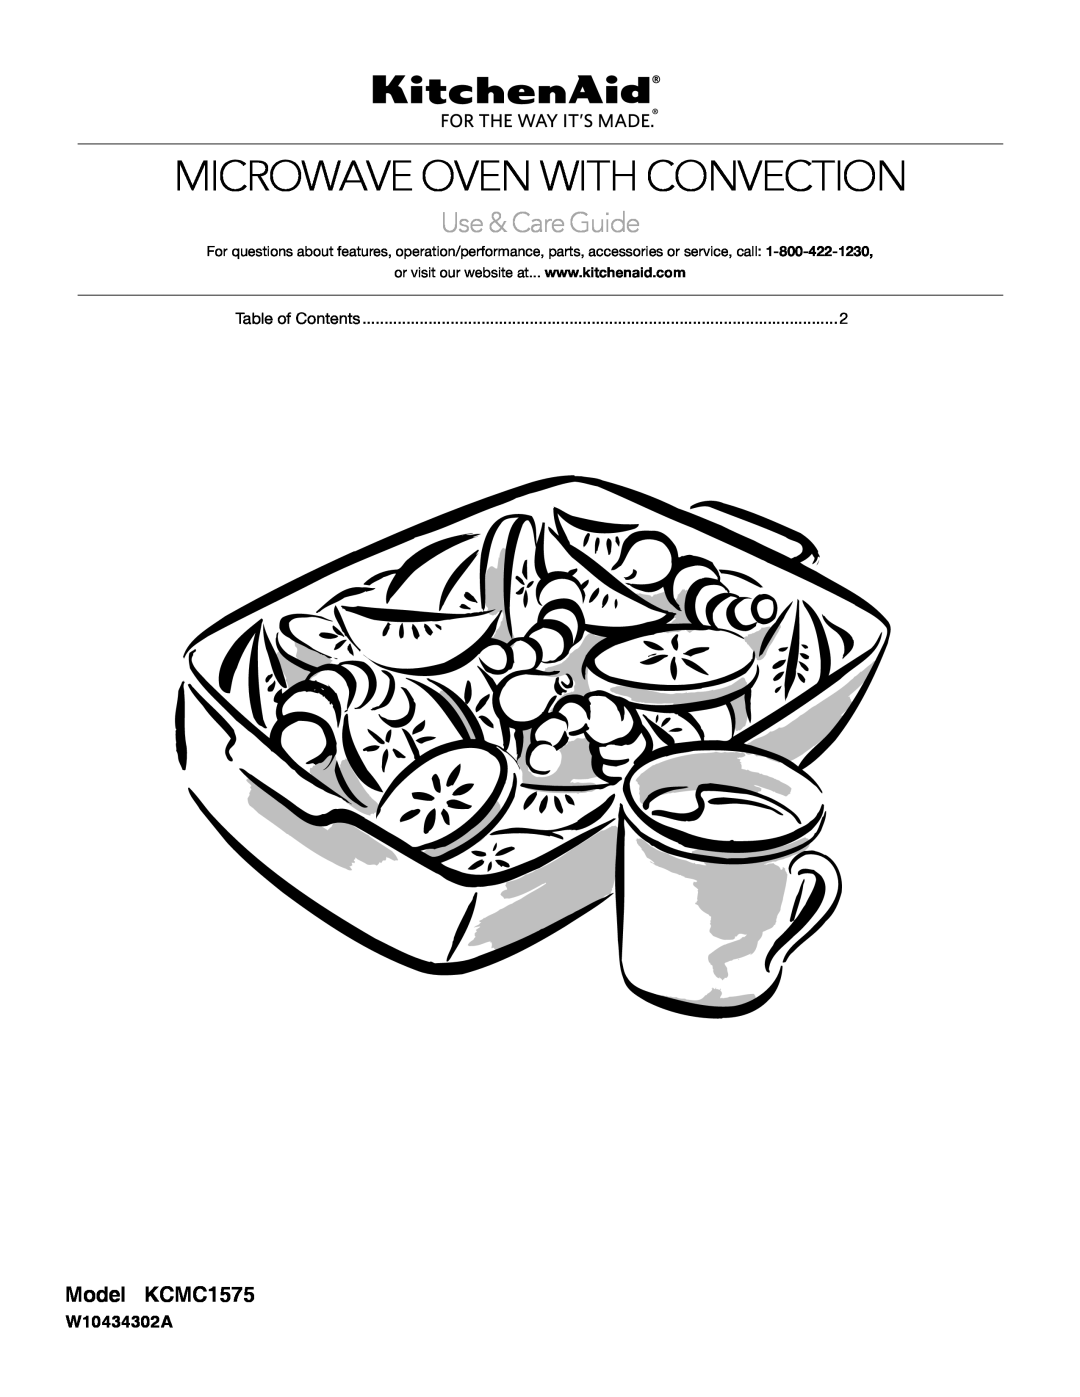 KitchenAid manual Model KCMC1575, W10434302A, Microwave Oven With Convection, Use & Care Guide 